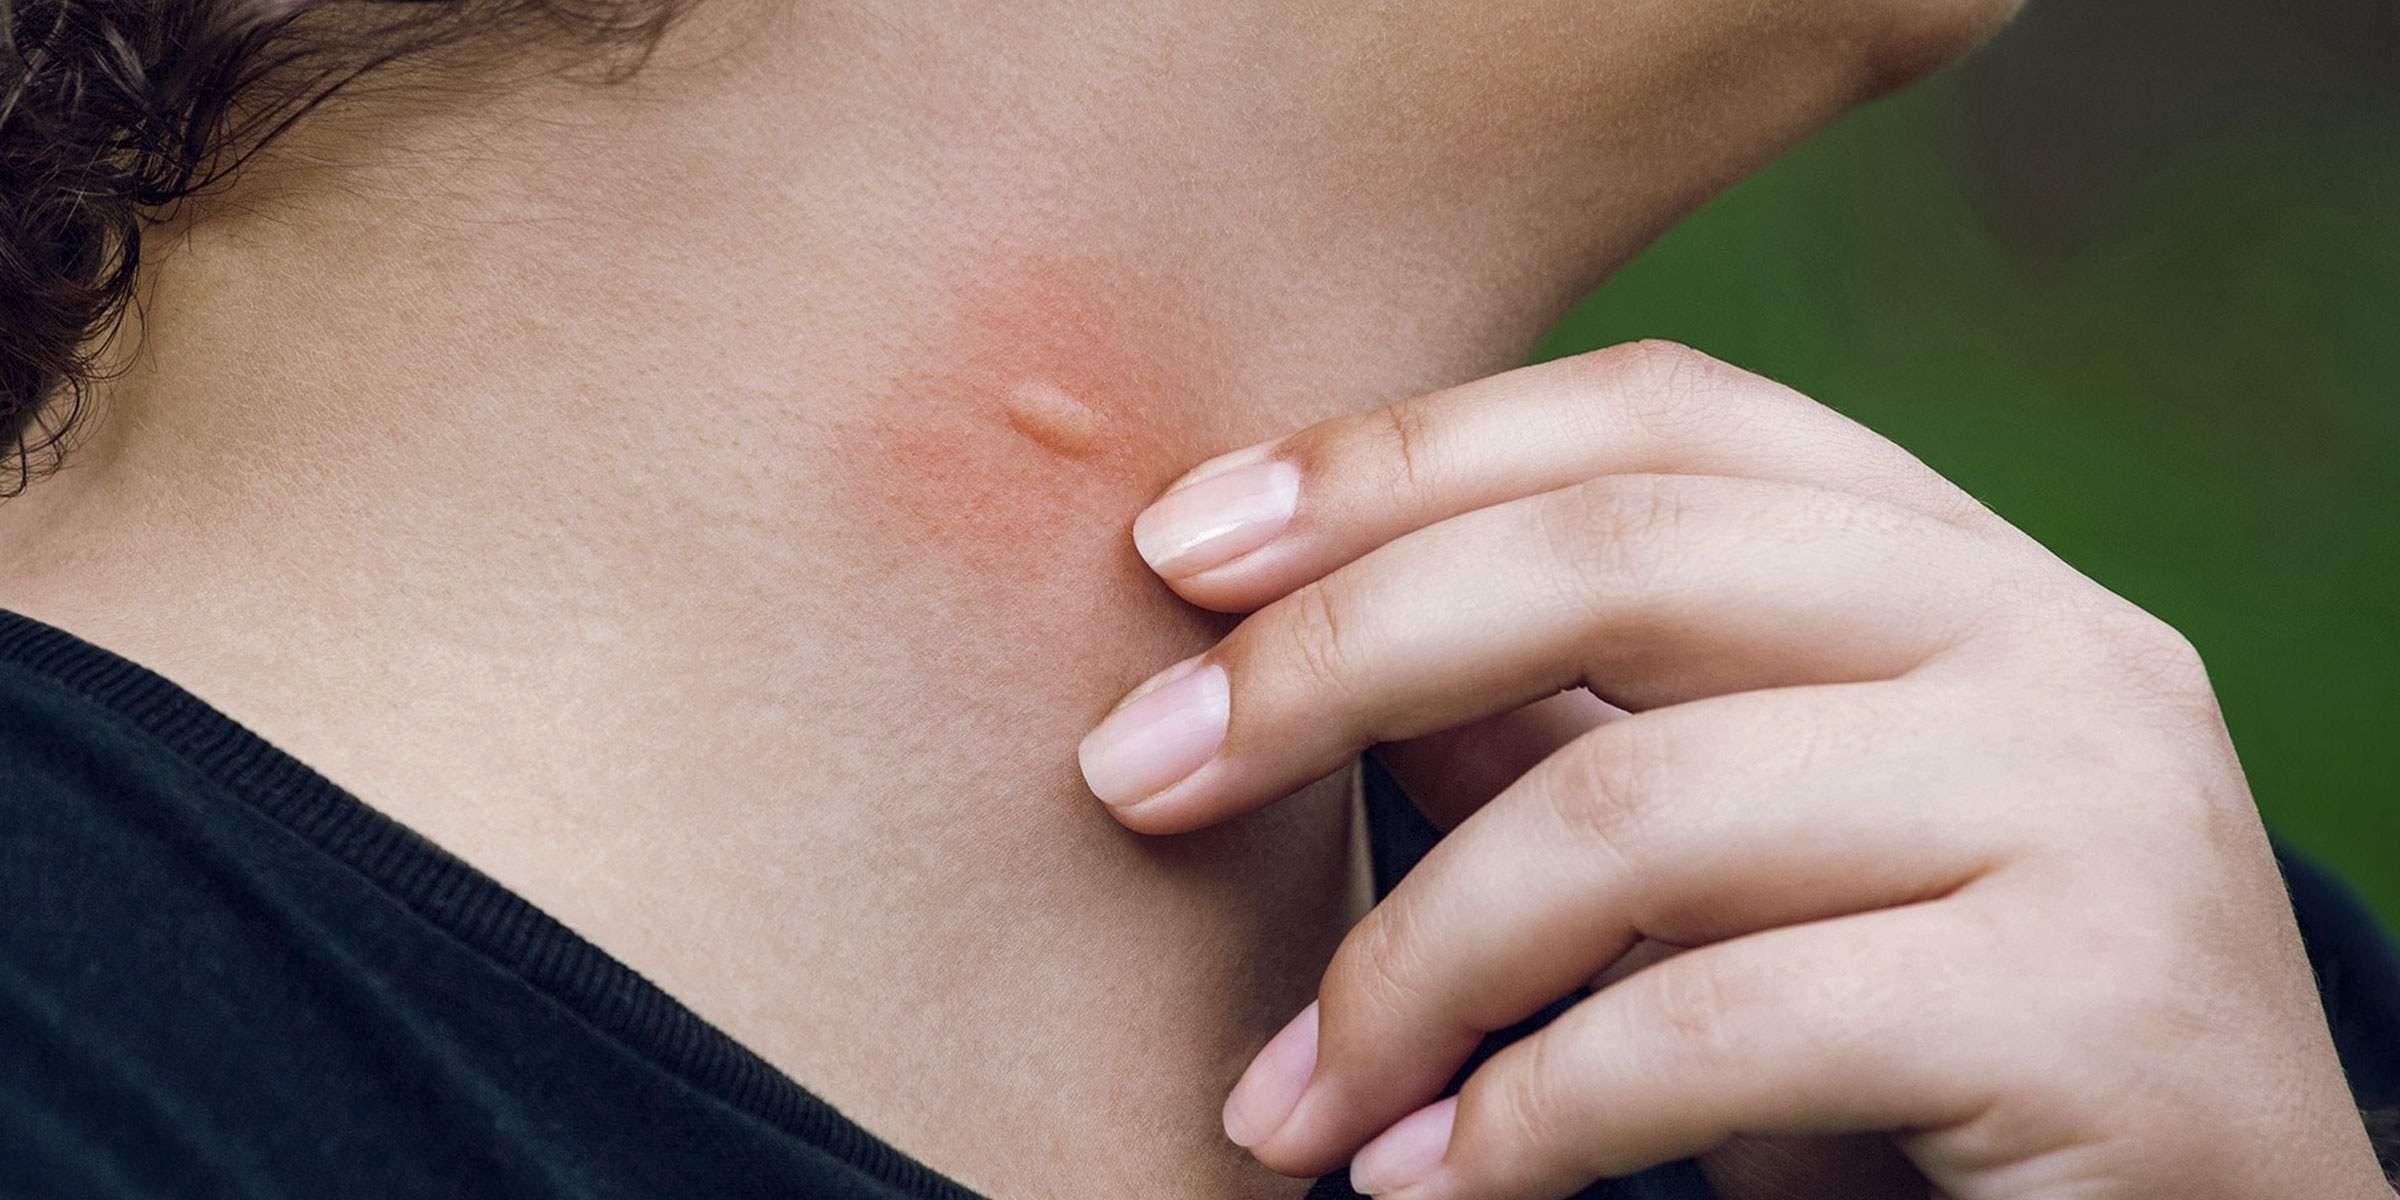 Relieve itching after an insect bite